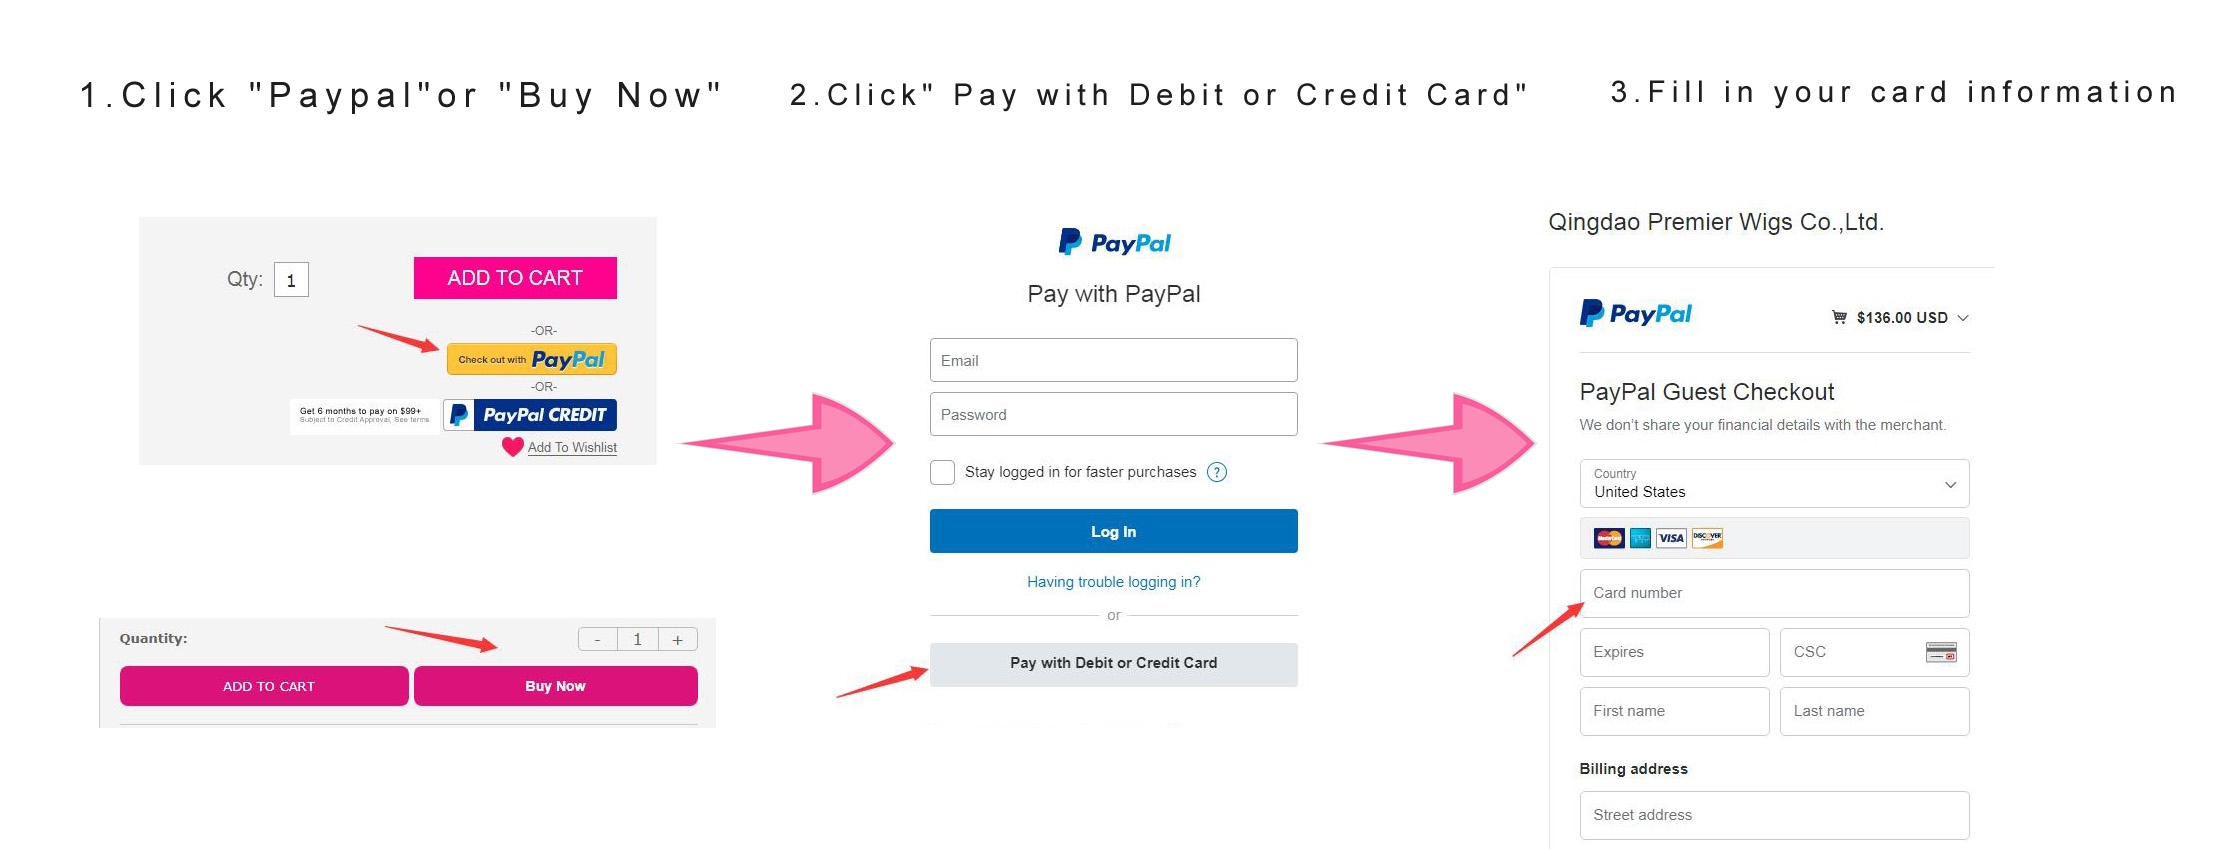 How to send payment via debit or credit card 